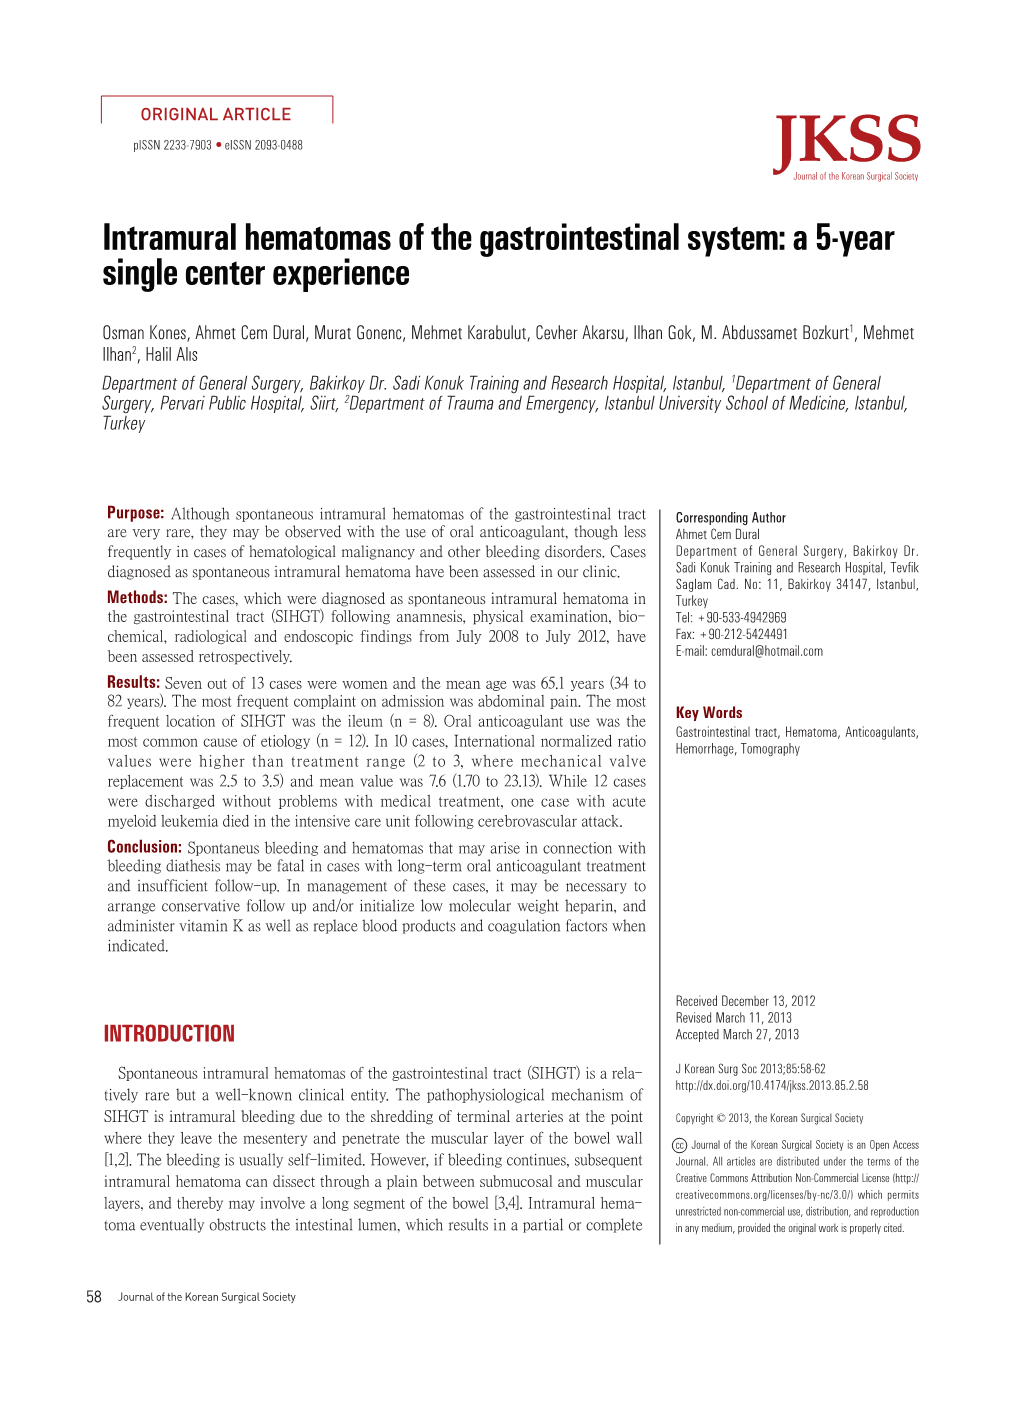 Intramural Hematomas of the Gastrointestinal System: a 5-Year Single Center Experience